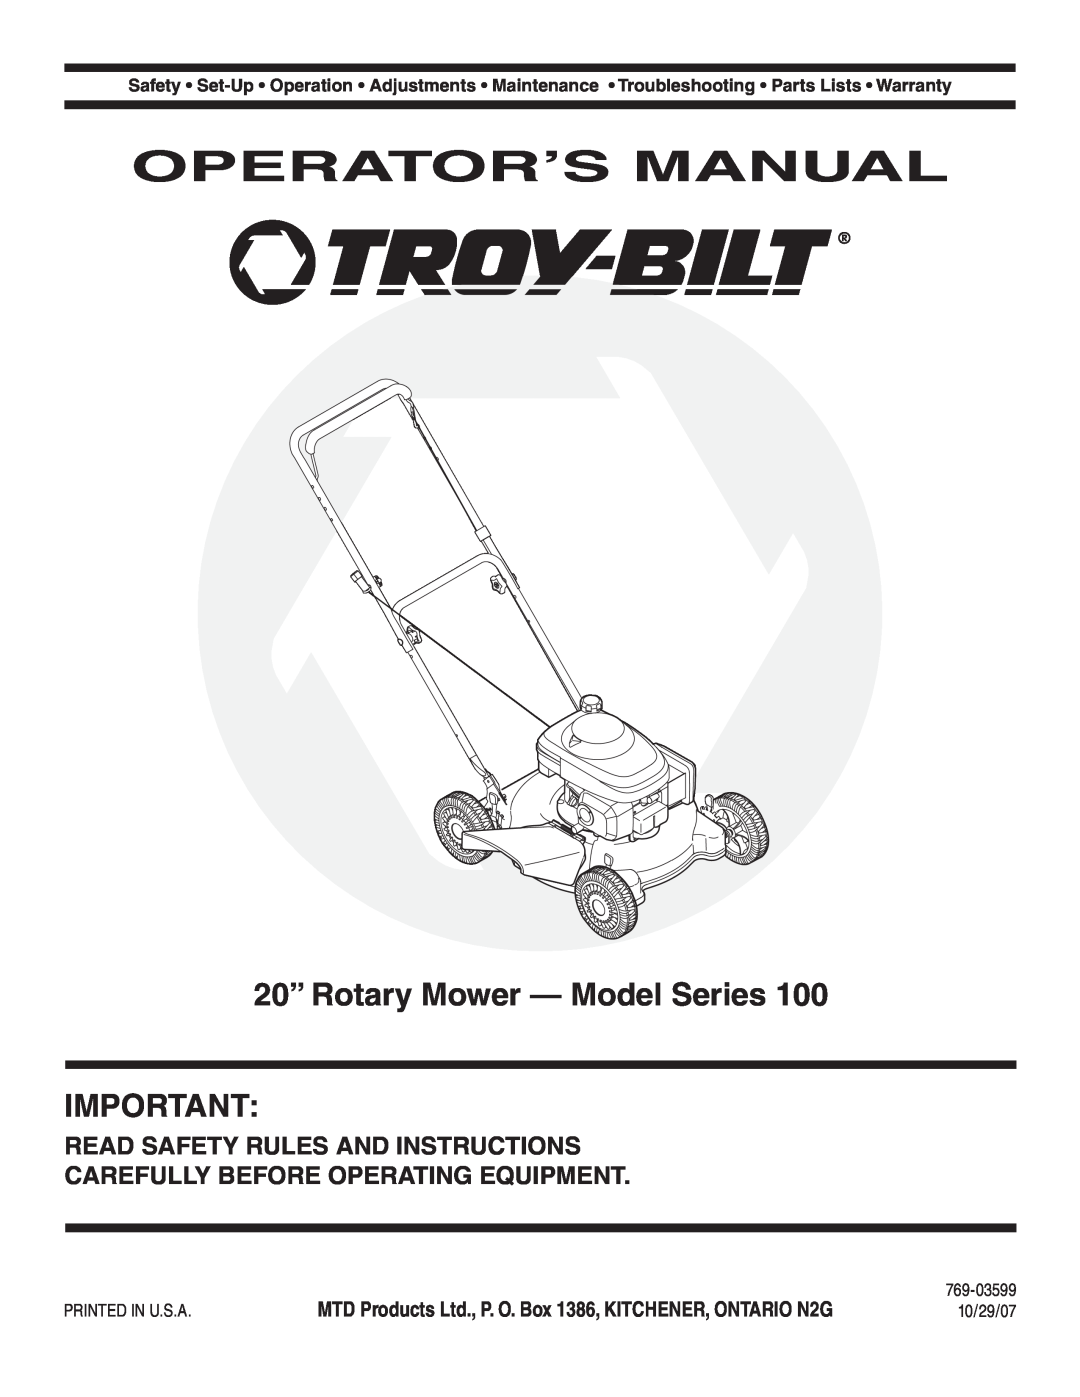 Troy-Bilt Series 100 warranty Operator’S Manual, 20” Rotary Mower - Model Series, Read Safety Rules And Instructions 